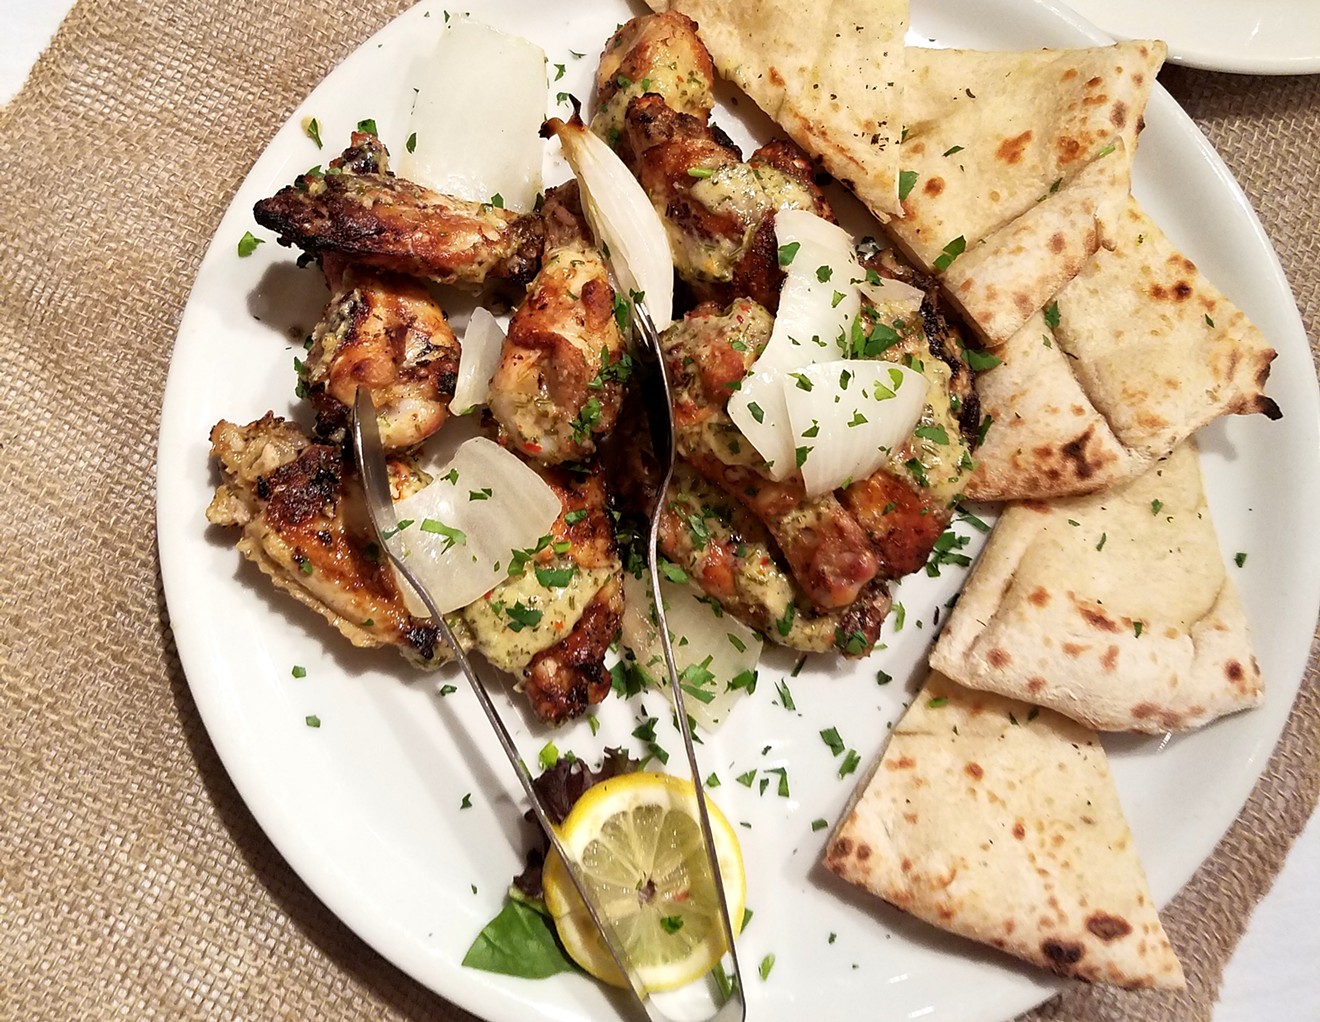 A large order of Racca's limoncello wings.